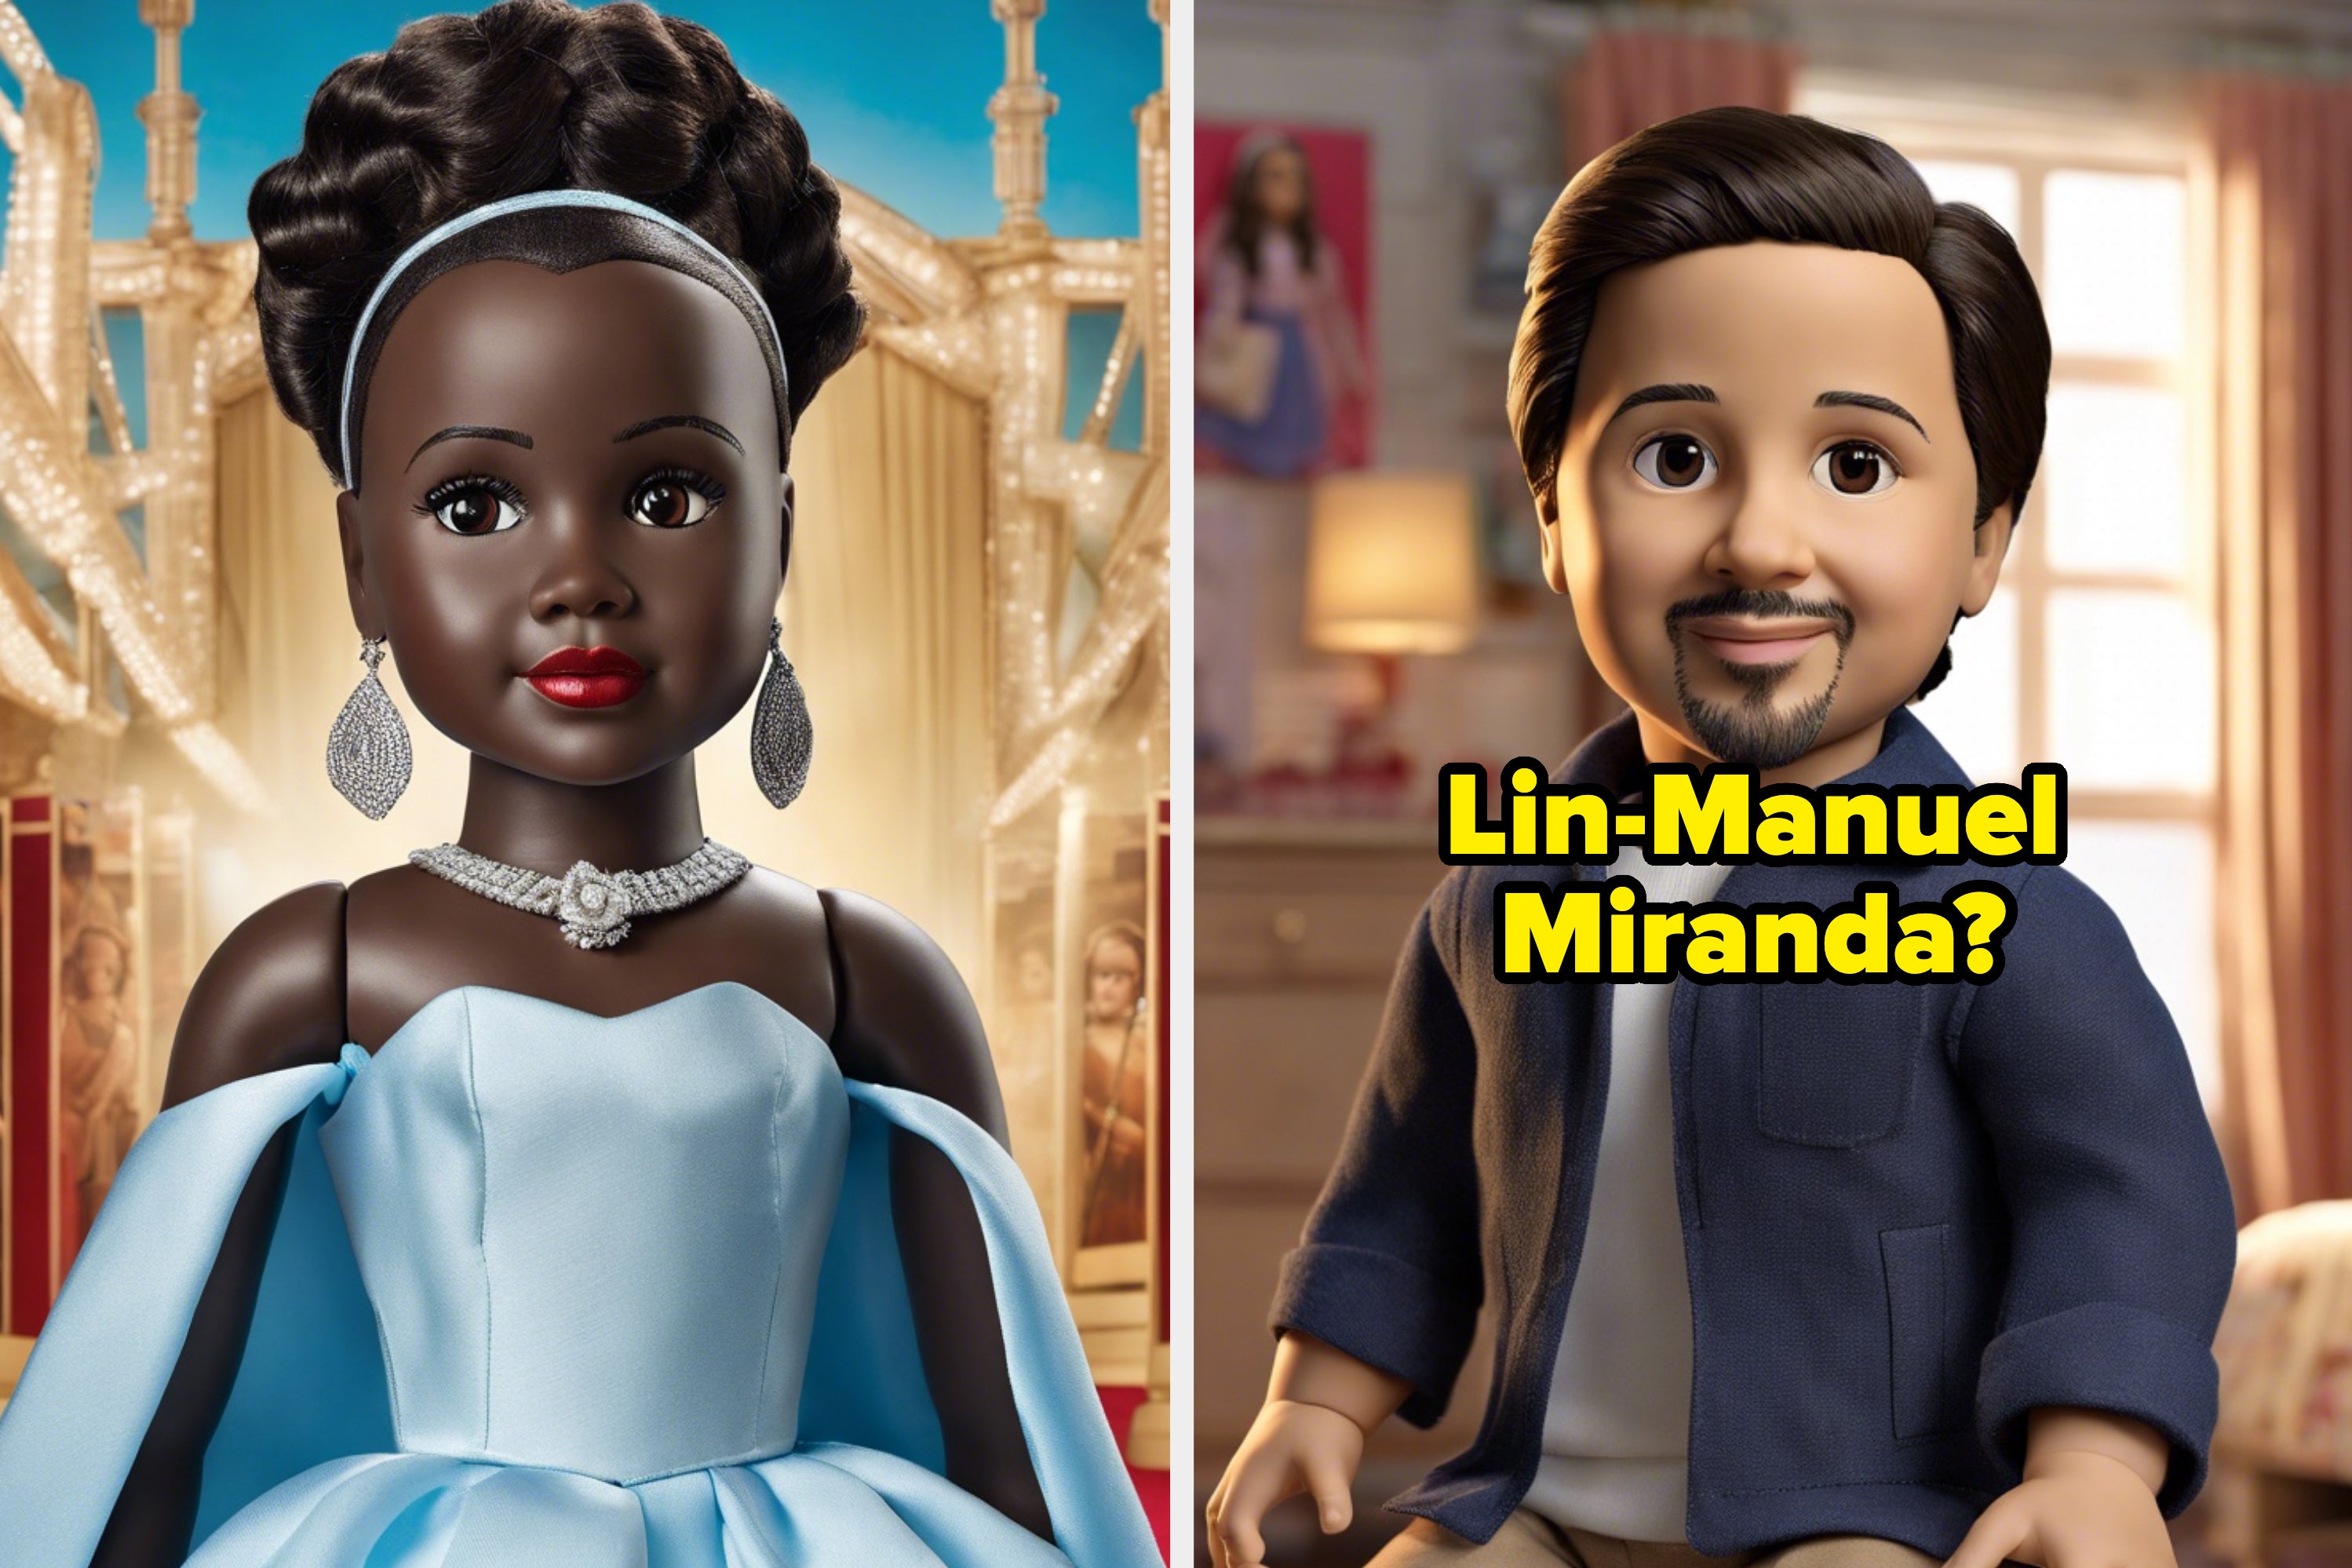 Let's See If You Can Match These AI American Girl Dolls To Their Celeb Counterparts